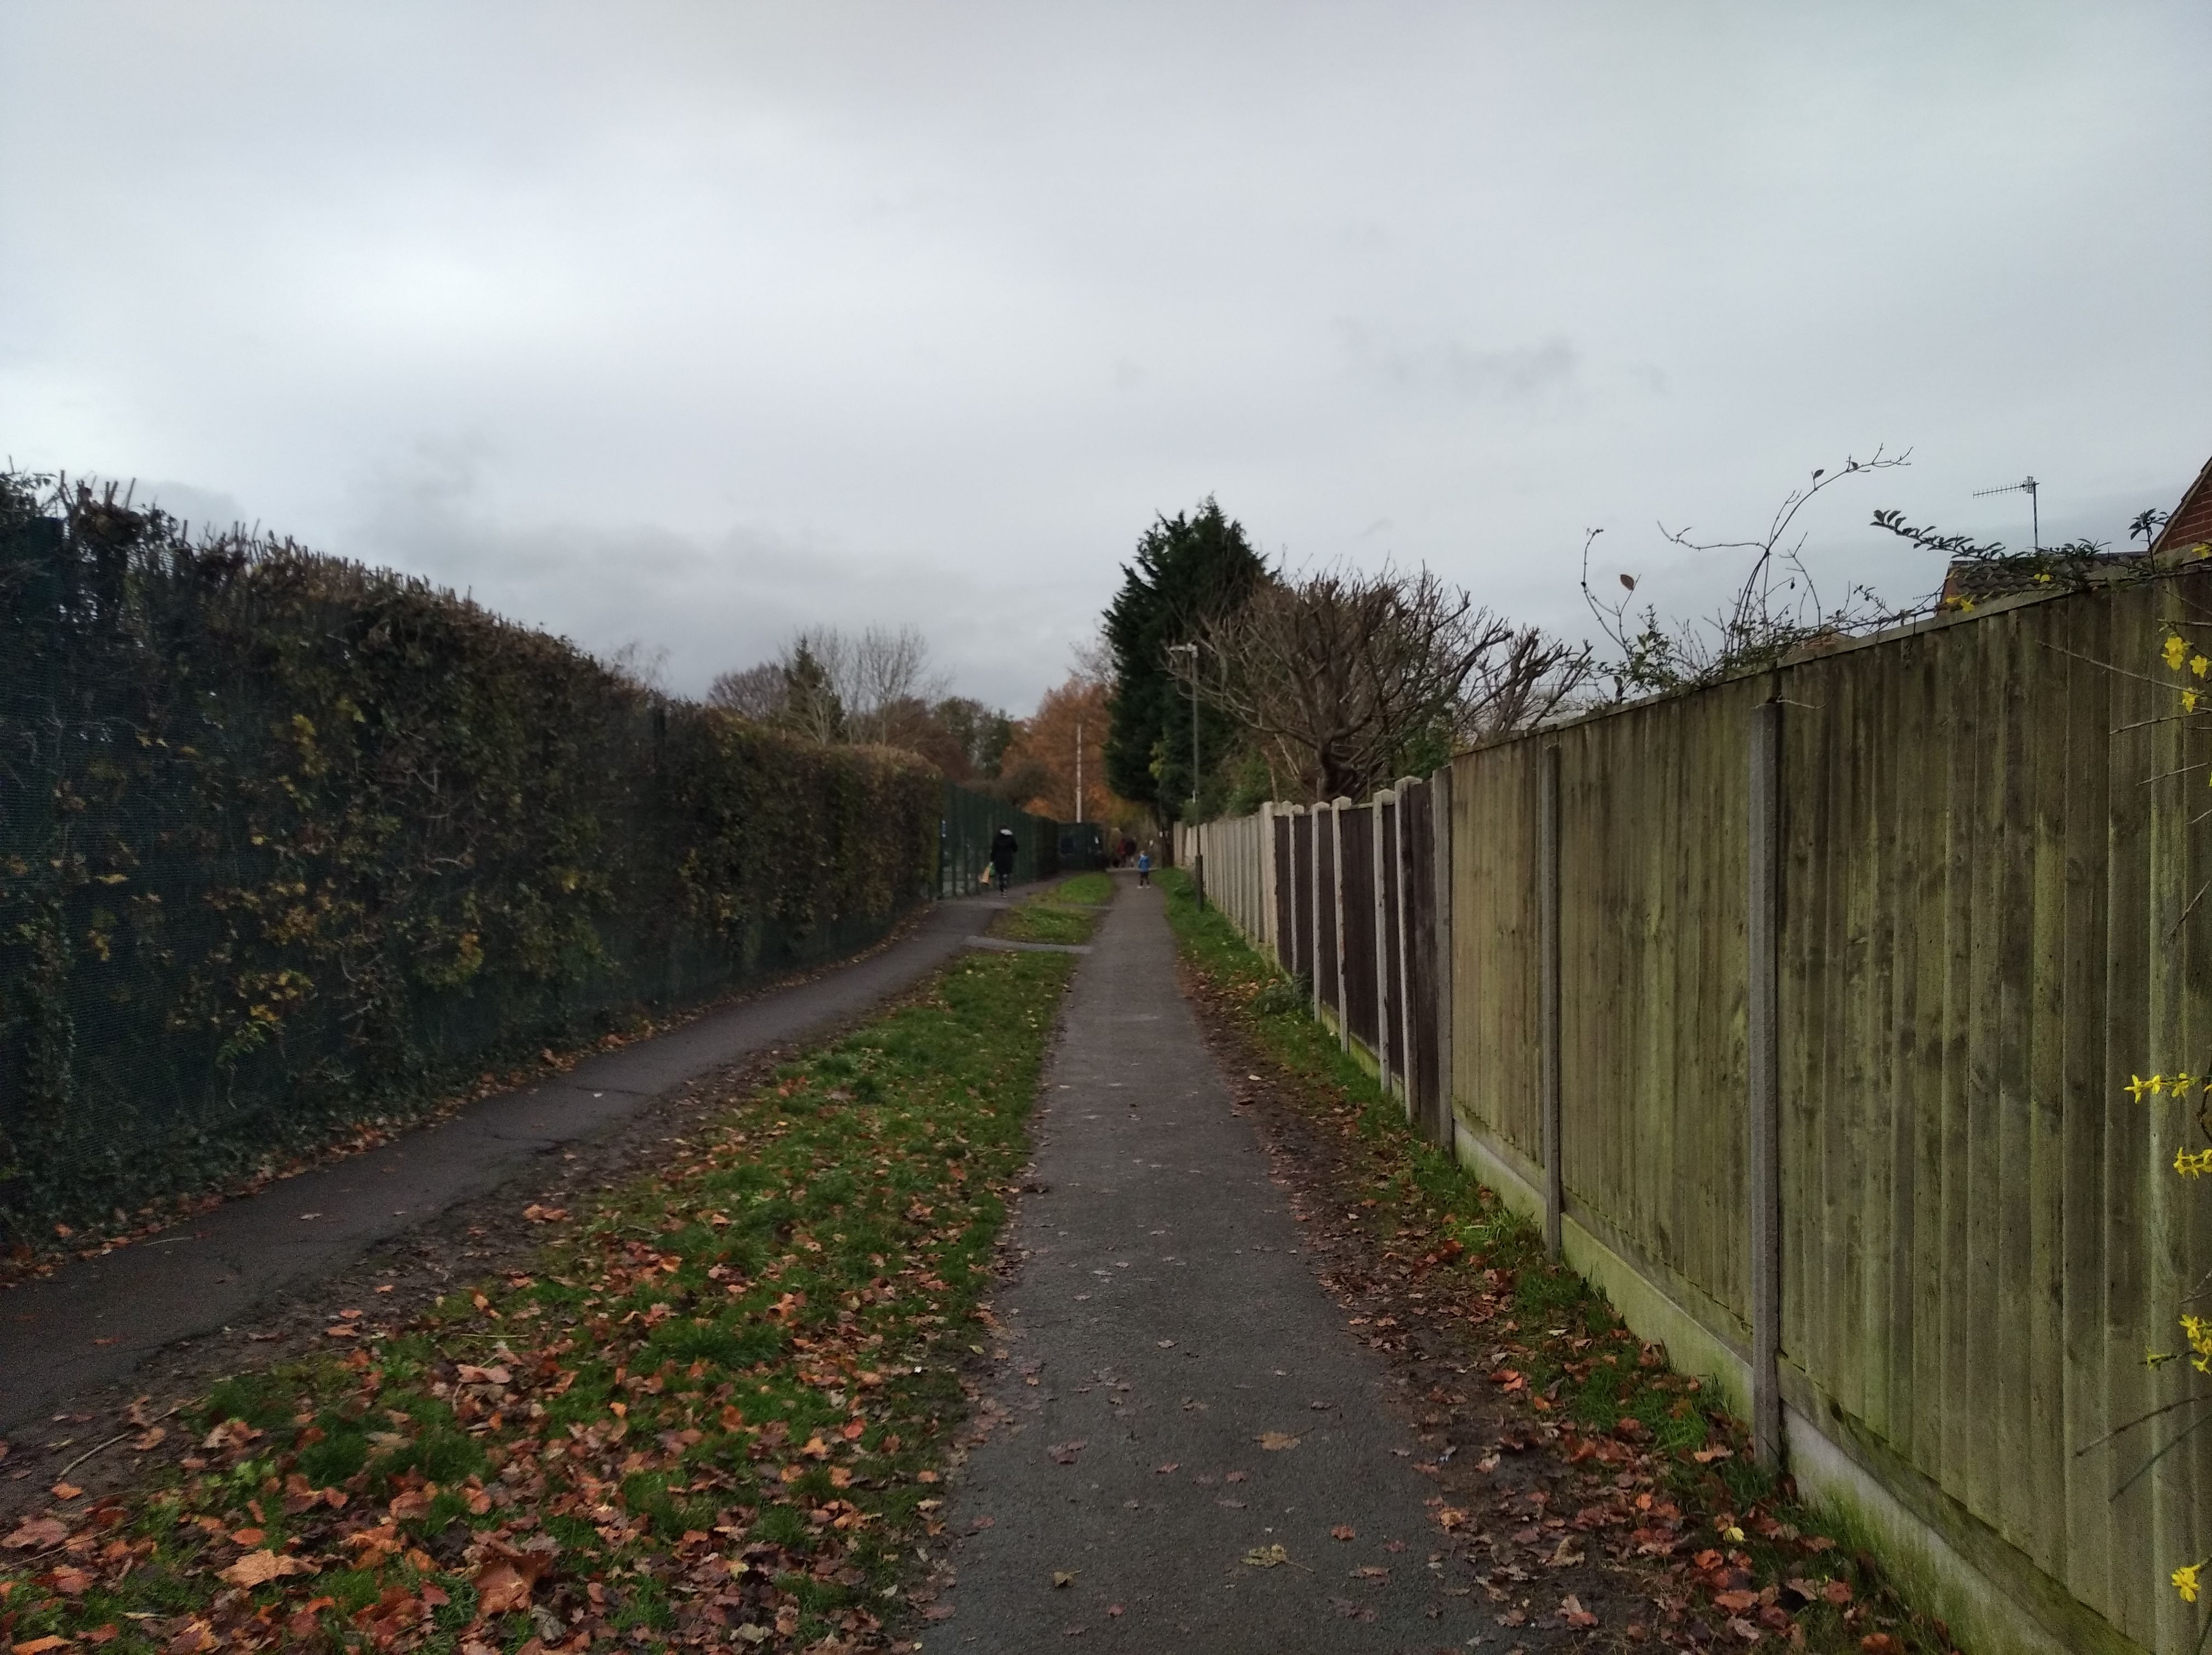 Two paths in this section by the Meadows Primary School